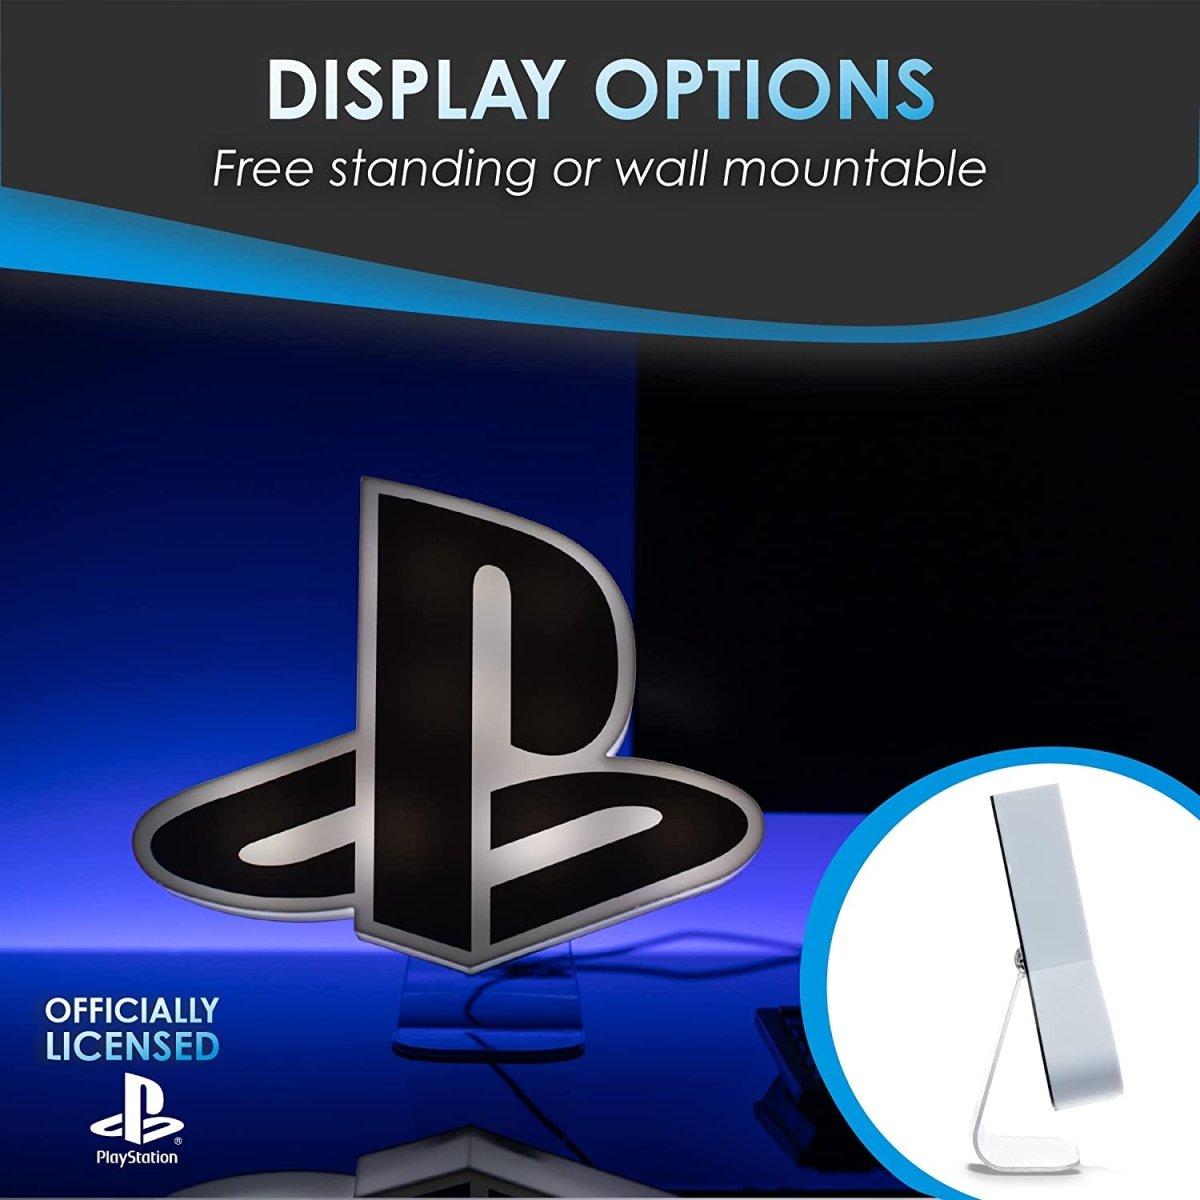 PlayStation Icon Light - GameOn.games